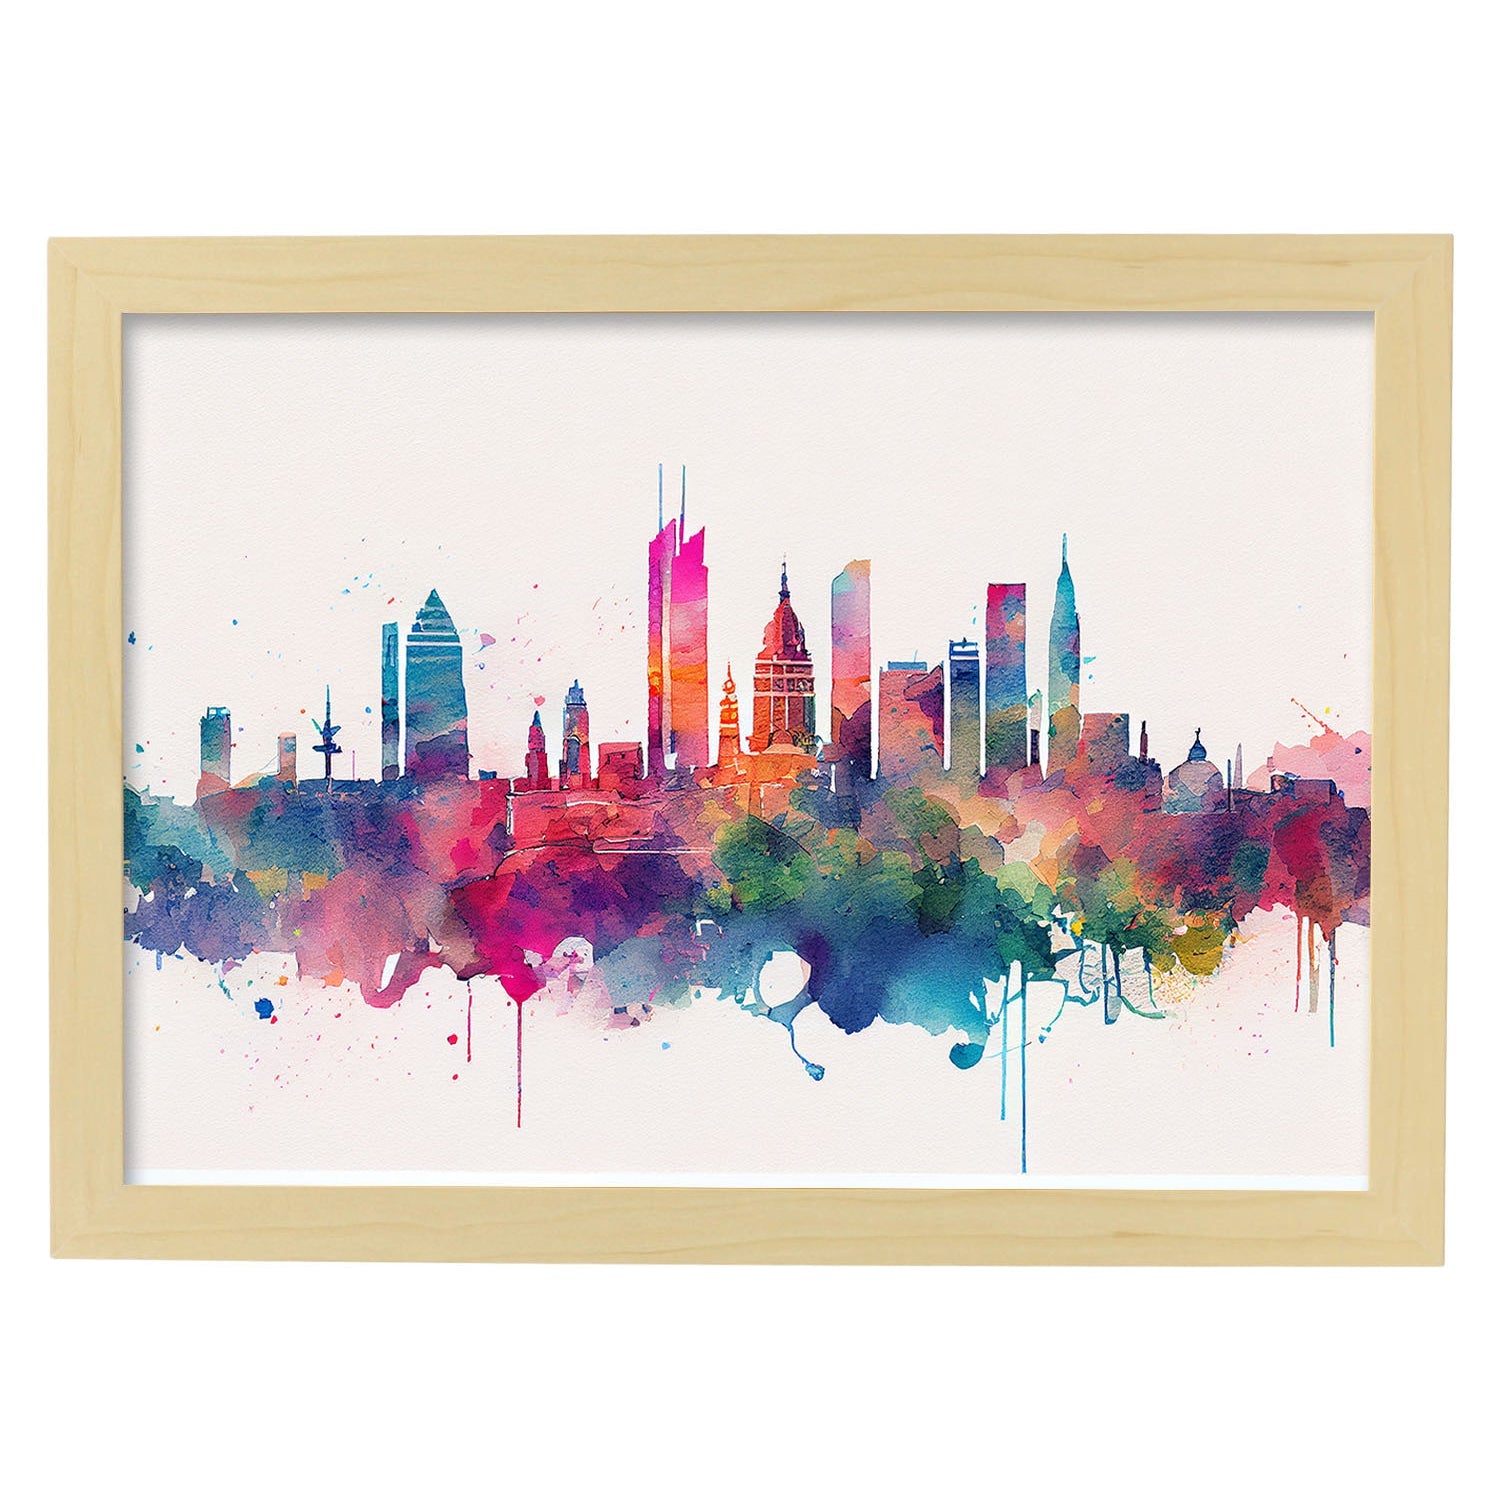 Nacnic watercolor of a skyline of the city of Mexico City. Aesthetic Wall Art Prints for Bedroom or Living Room Design.-Artwork-Nacnic-A4-Marco Madera Clara-Nacnic Estudio SL